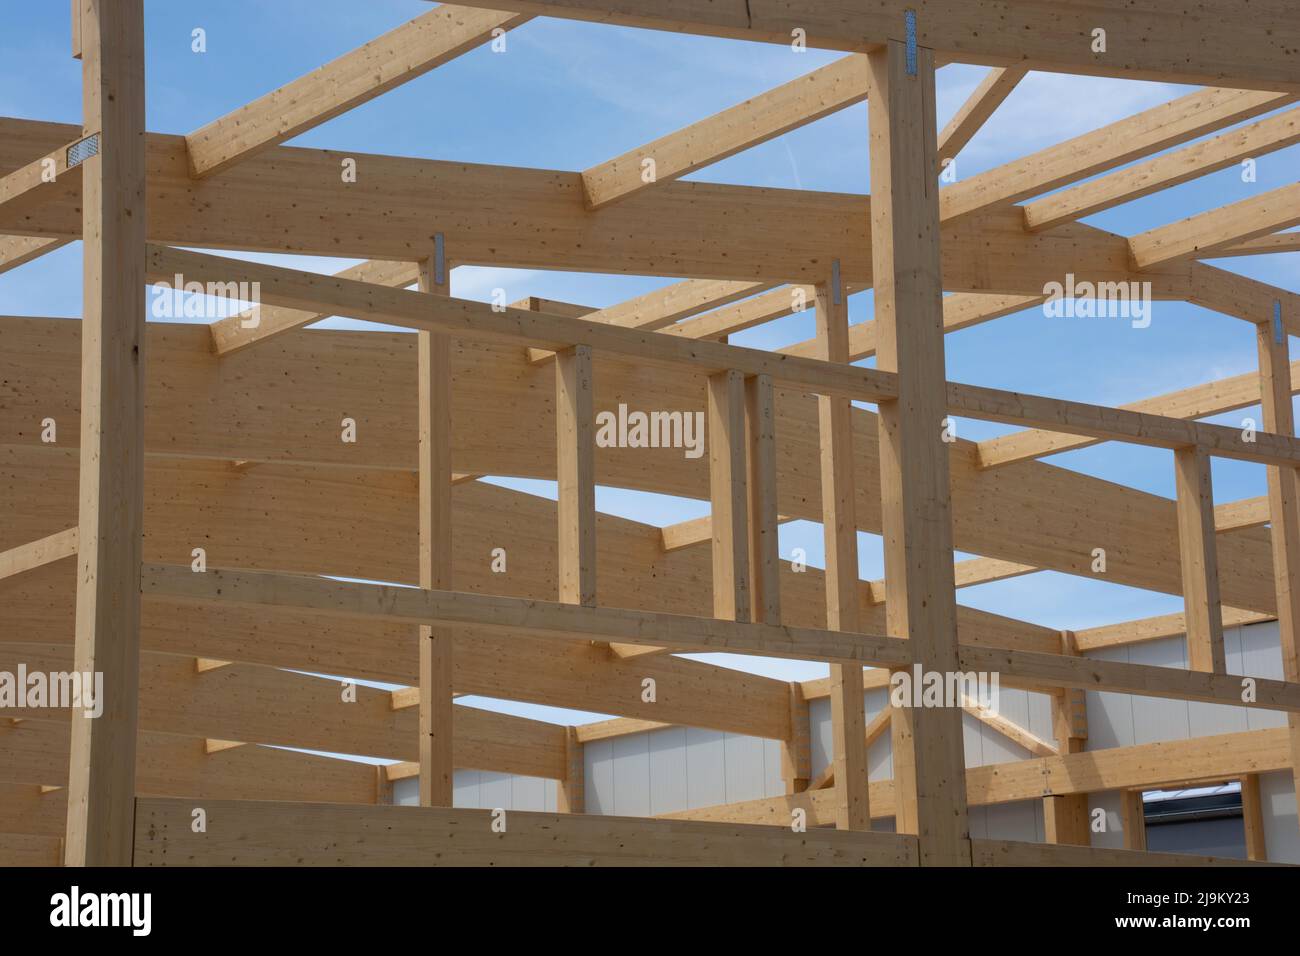 large wooden beams of a roof and side construction connected with large steel screws Stock Photo